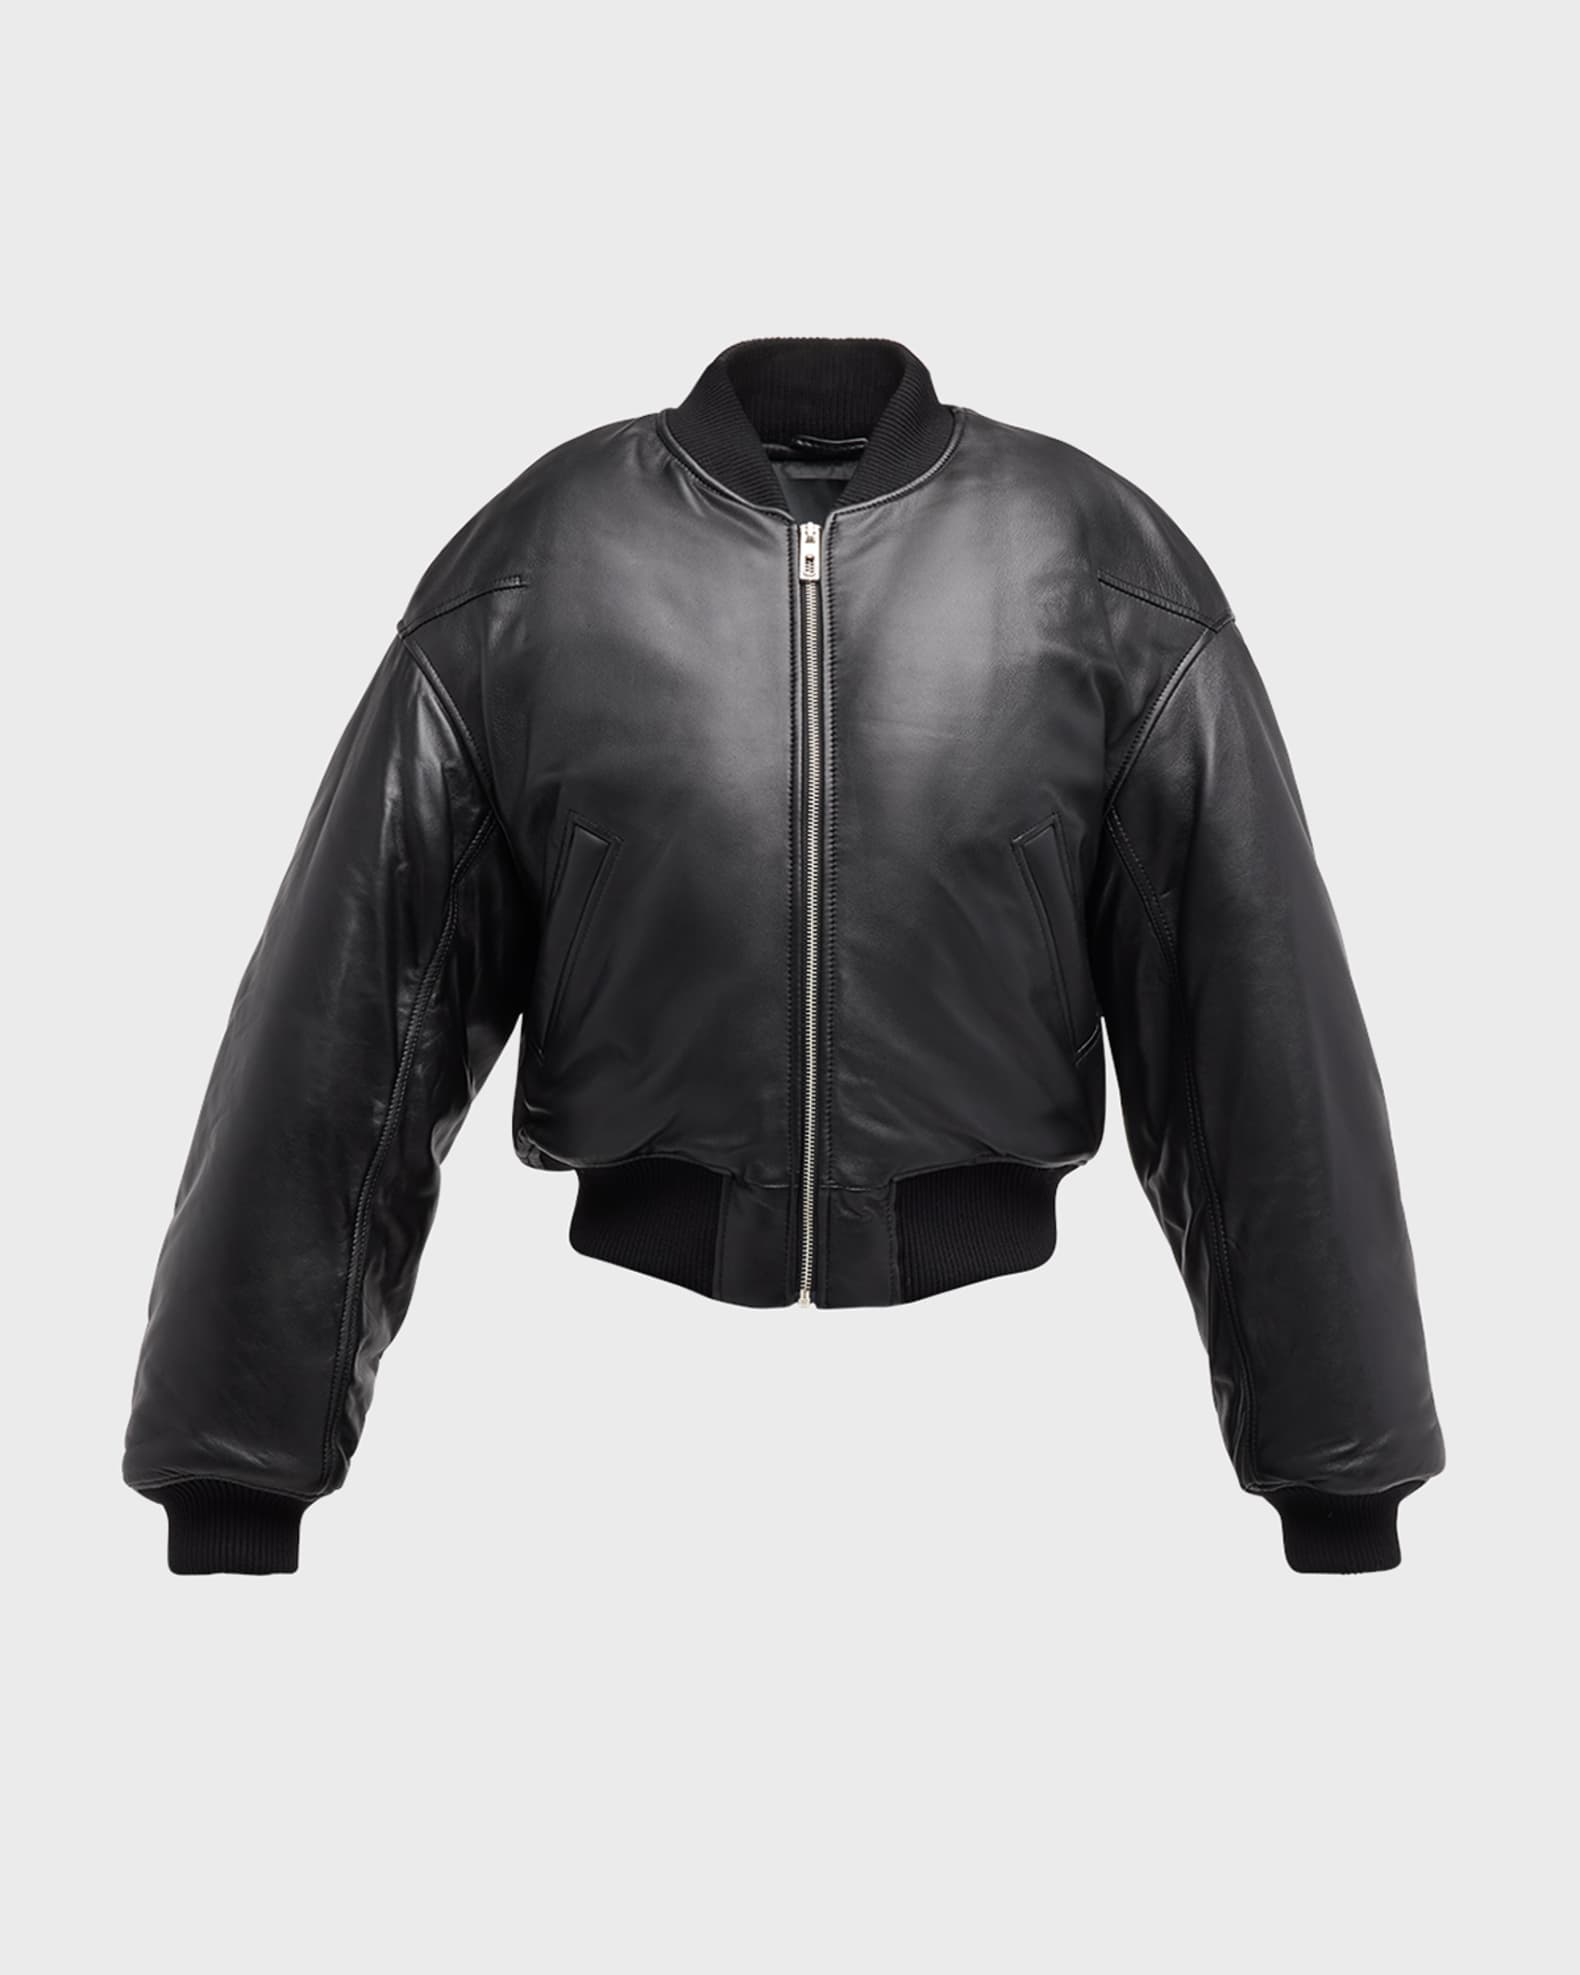 Marc Jacobs Puffy Leather Bomber Jacket | Neiman Marcus